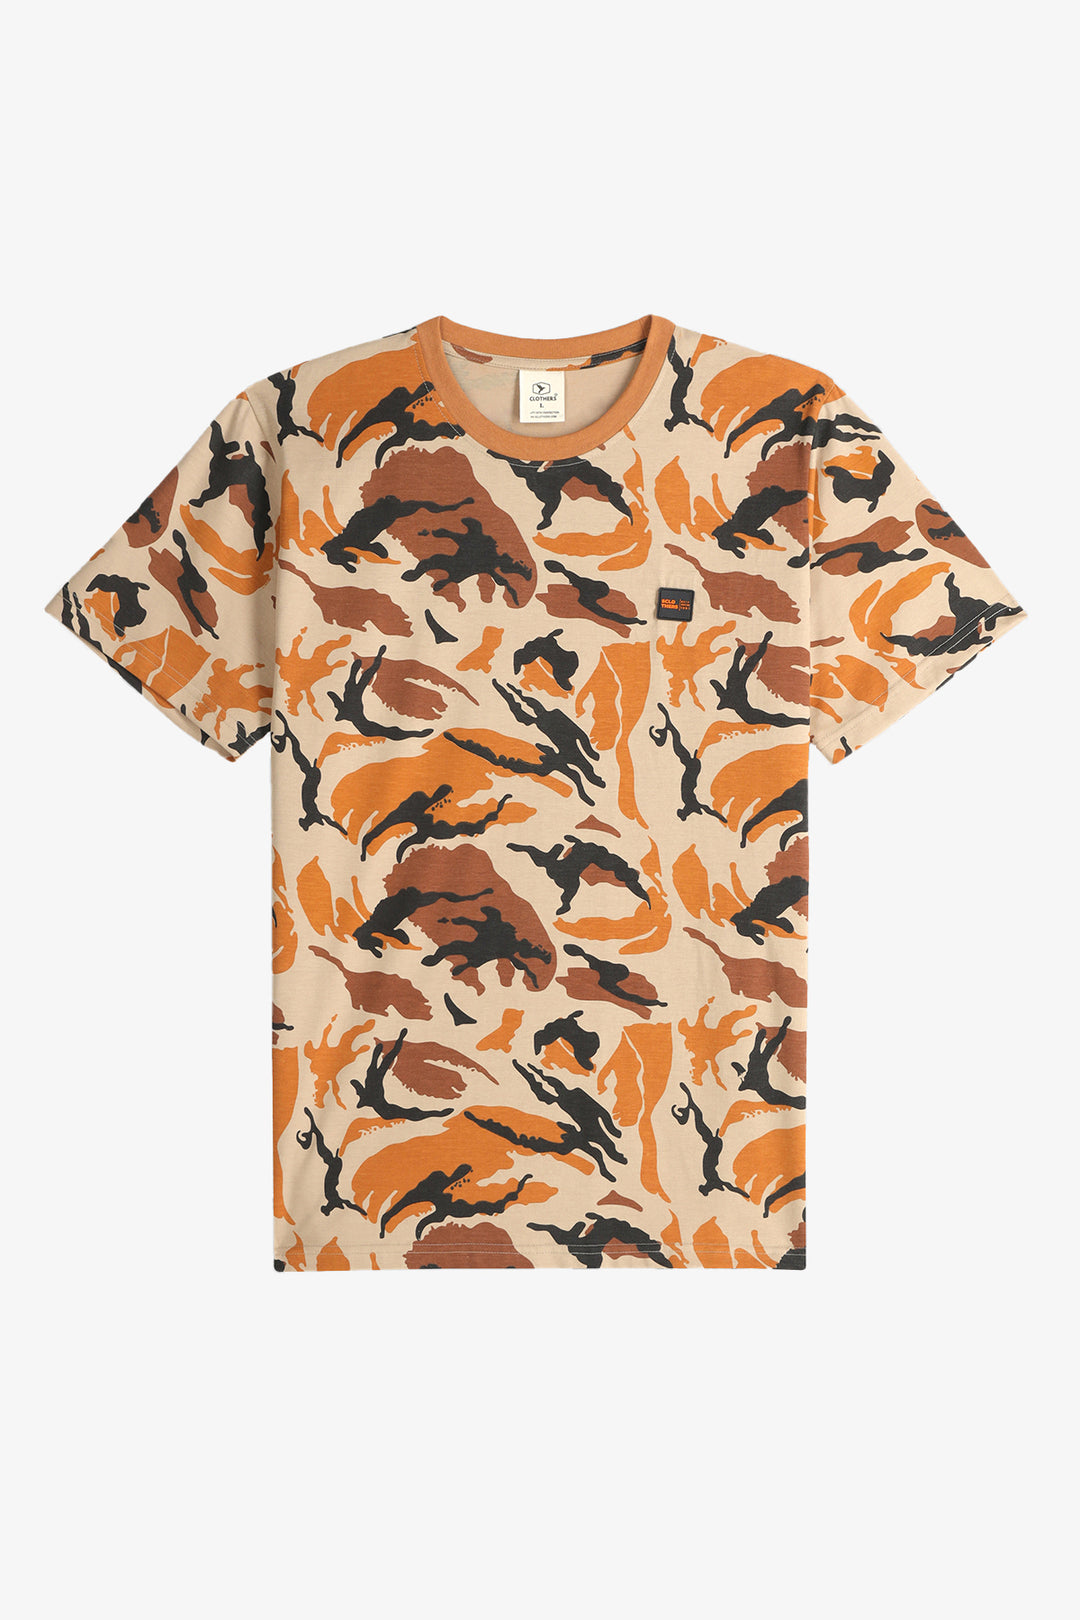 Nomad Camo Printed T-Shirt with Leather Patch - A24 - MT0324R